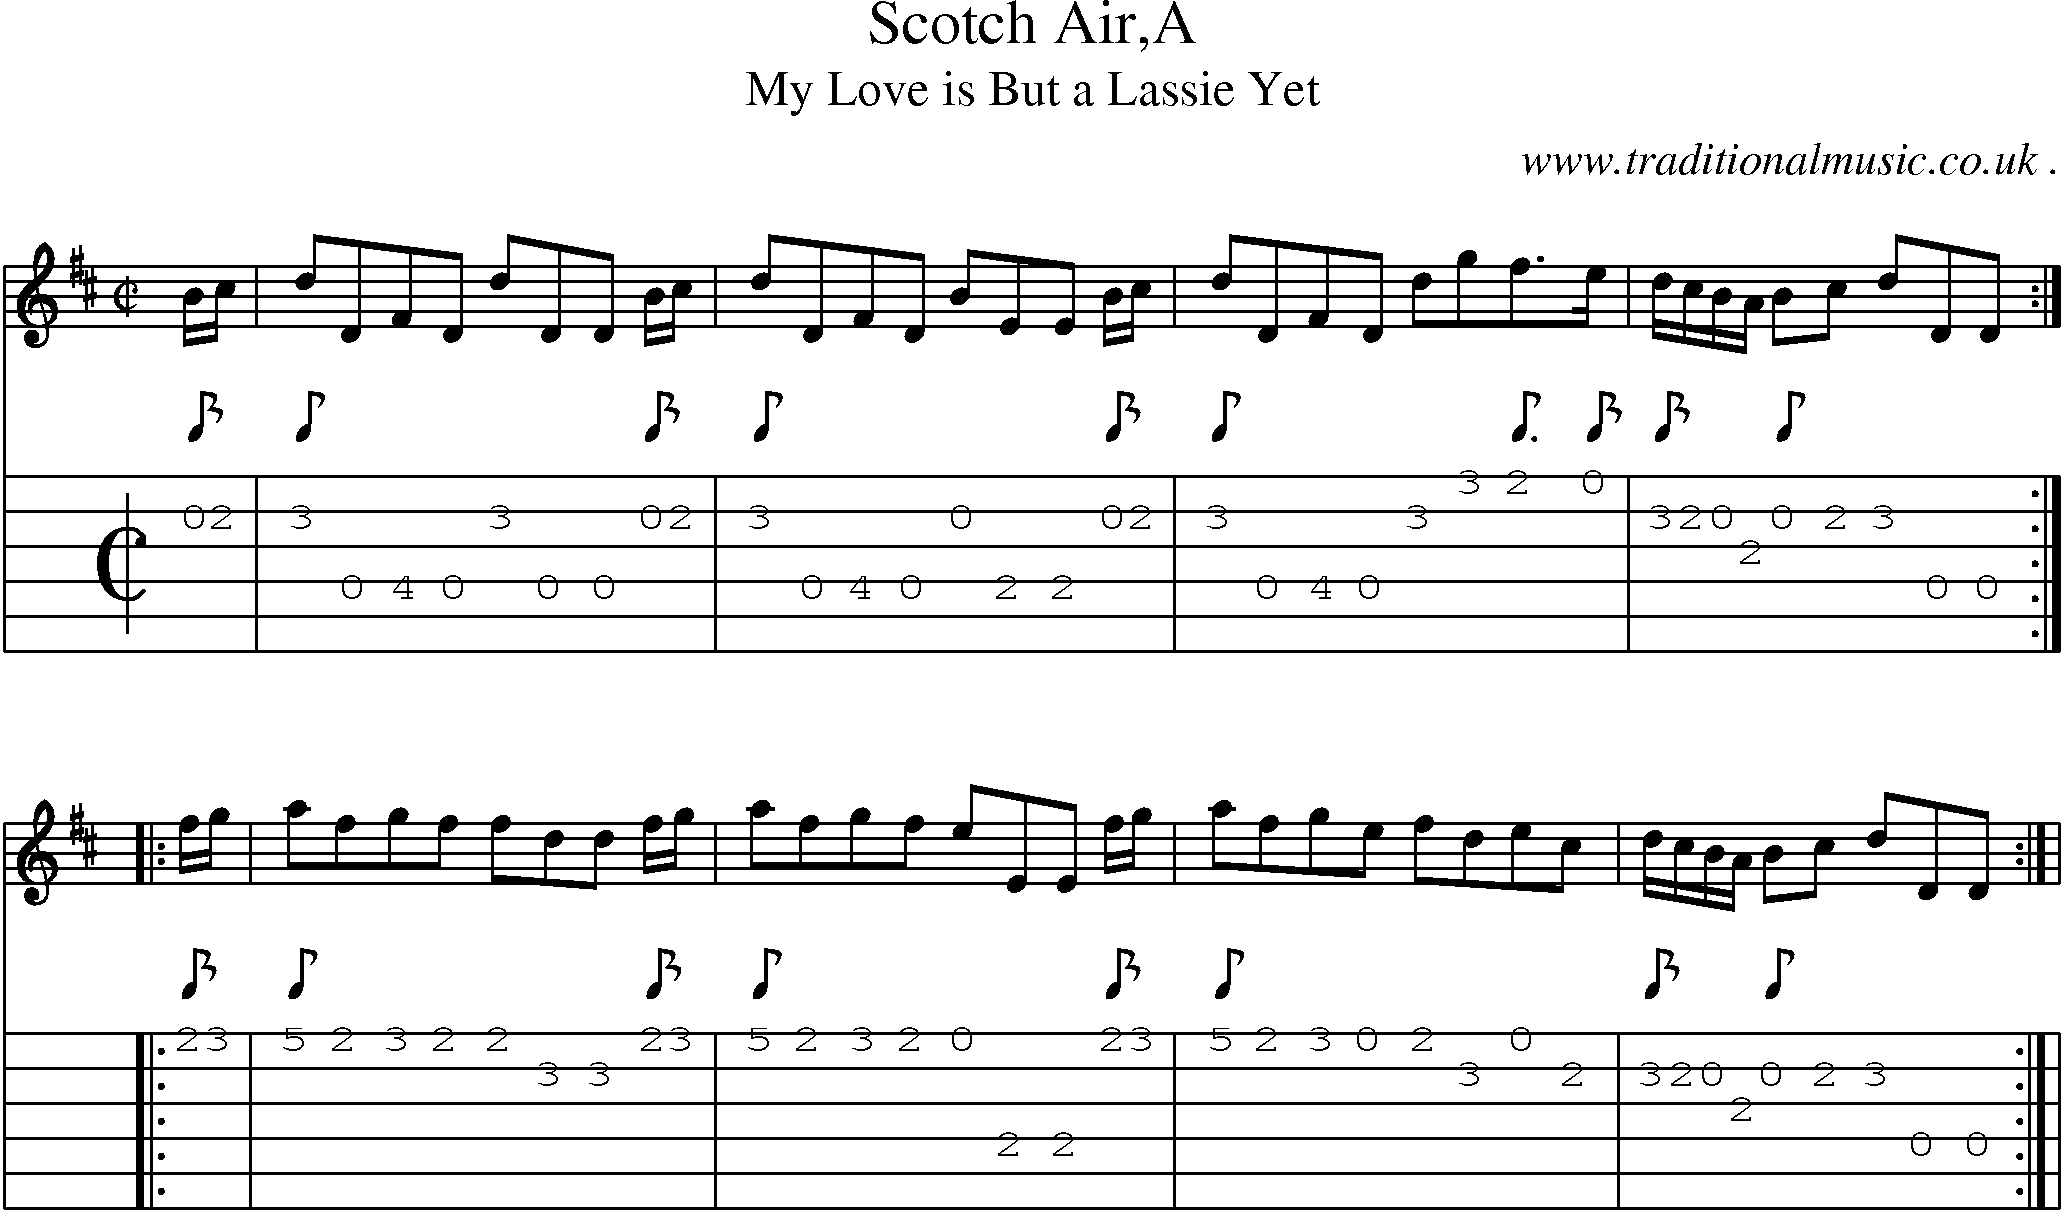 Sheet-Music and Guitar Tabs for Scotch Aira